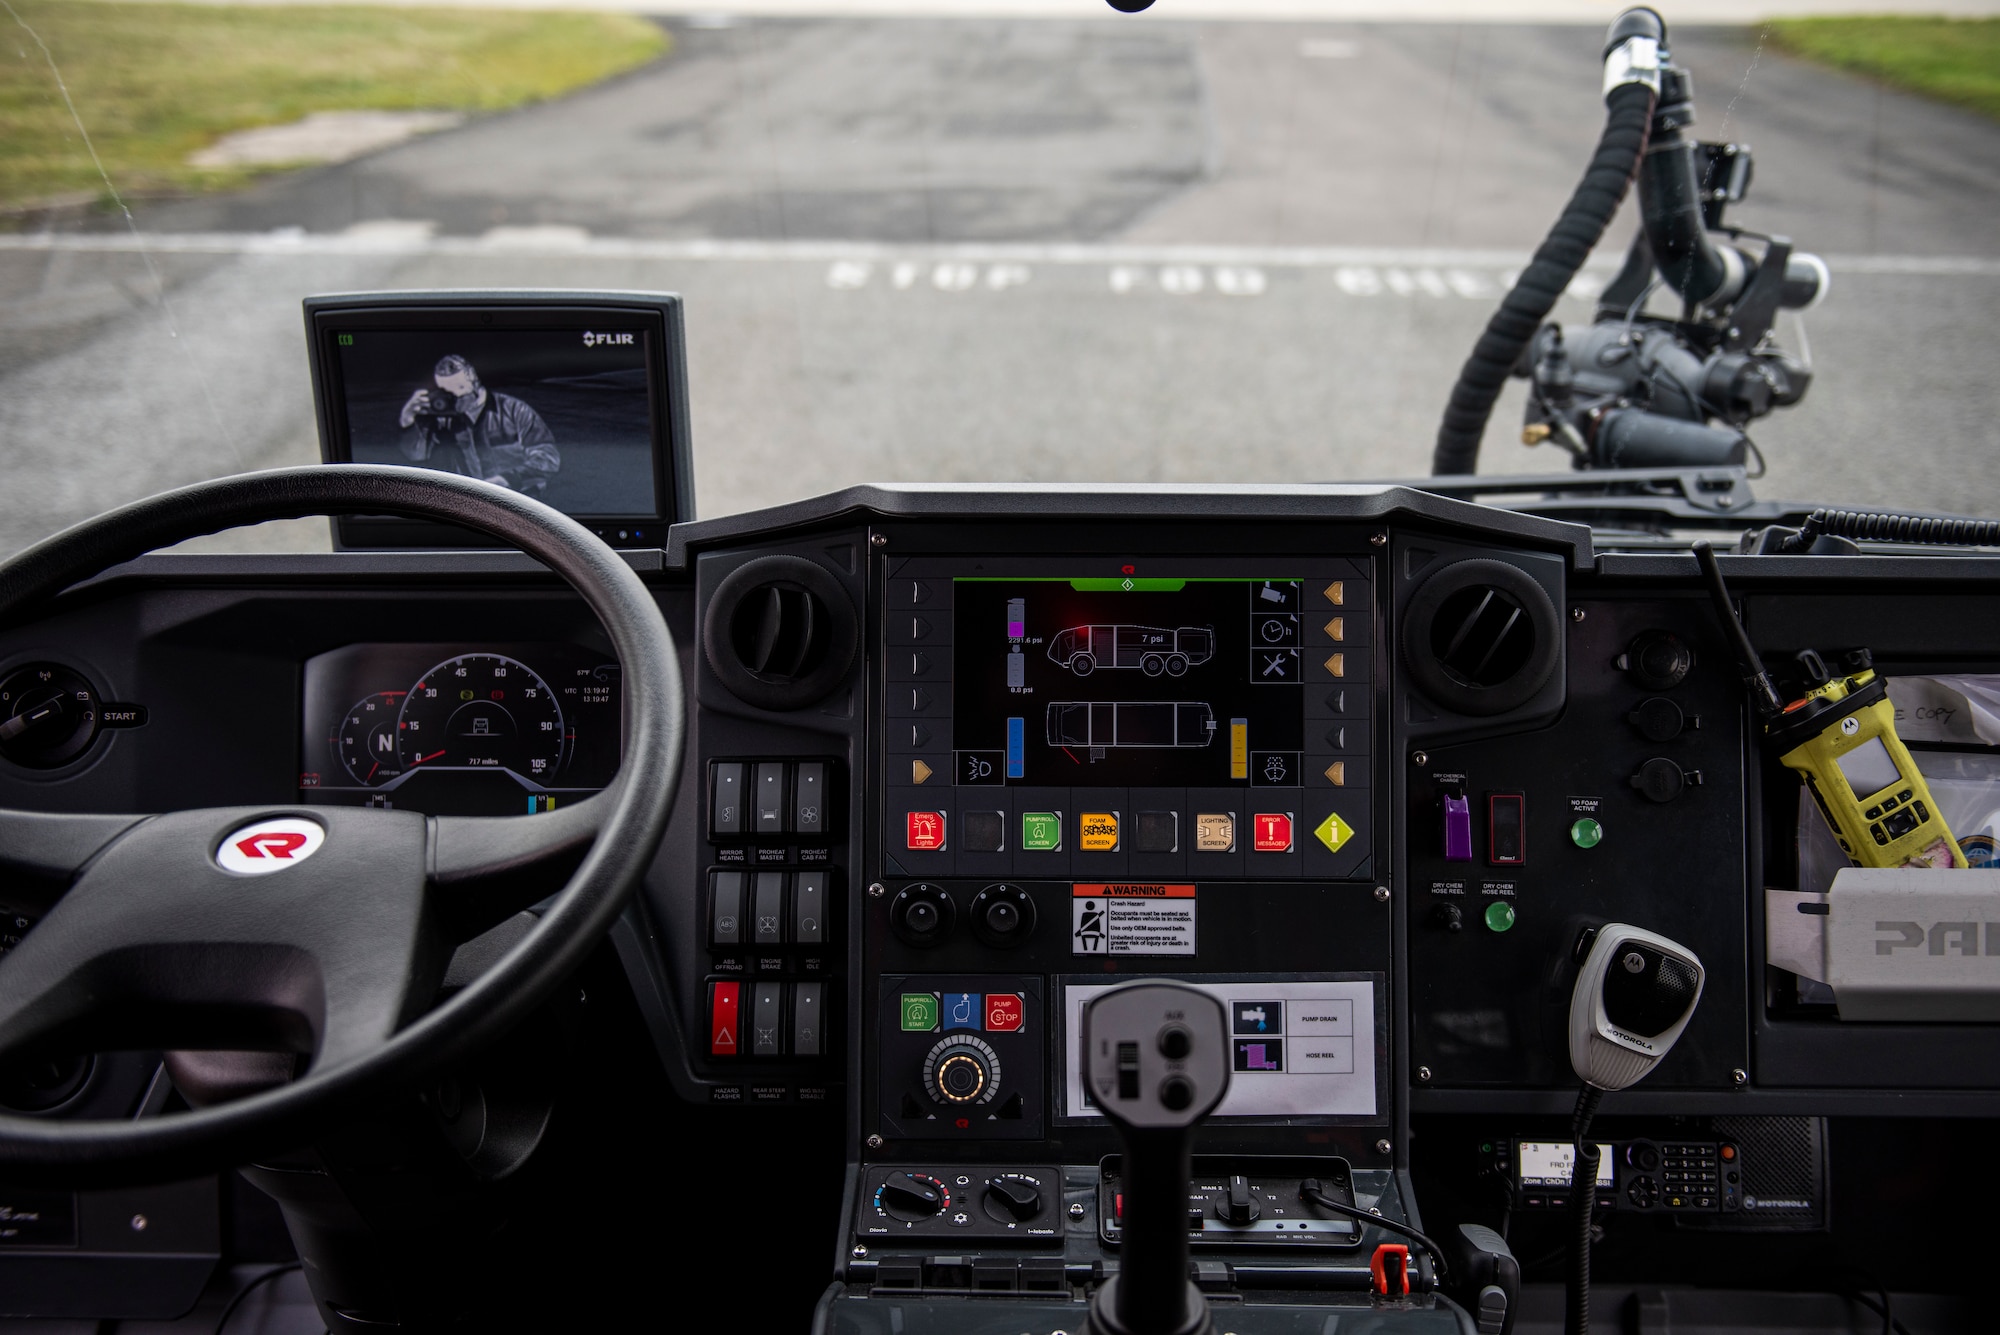 The interior of a Rosenbauer PANTHER belonging to the 422d Fire Emergency Services, displays the turret’s infrared camera functionality at RAF Fairford, England, Oct. 23, 2020. The new vehicle more than doubles the amount of time that firefighters can fight an airfield fire before needing resupply. (U.S. Air Force photo by Tech. Sgt. Aaron Thomasson)